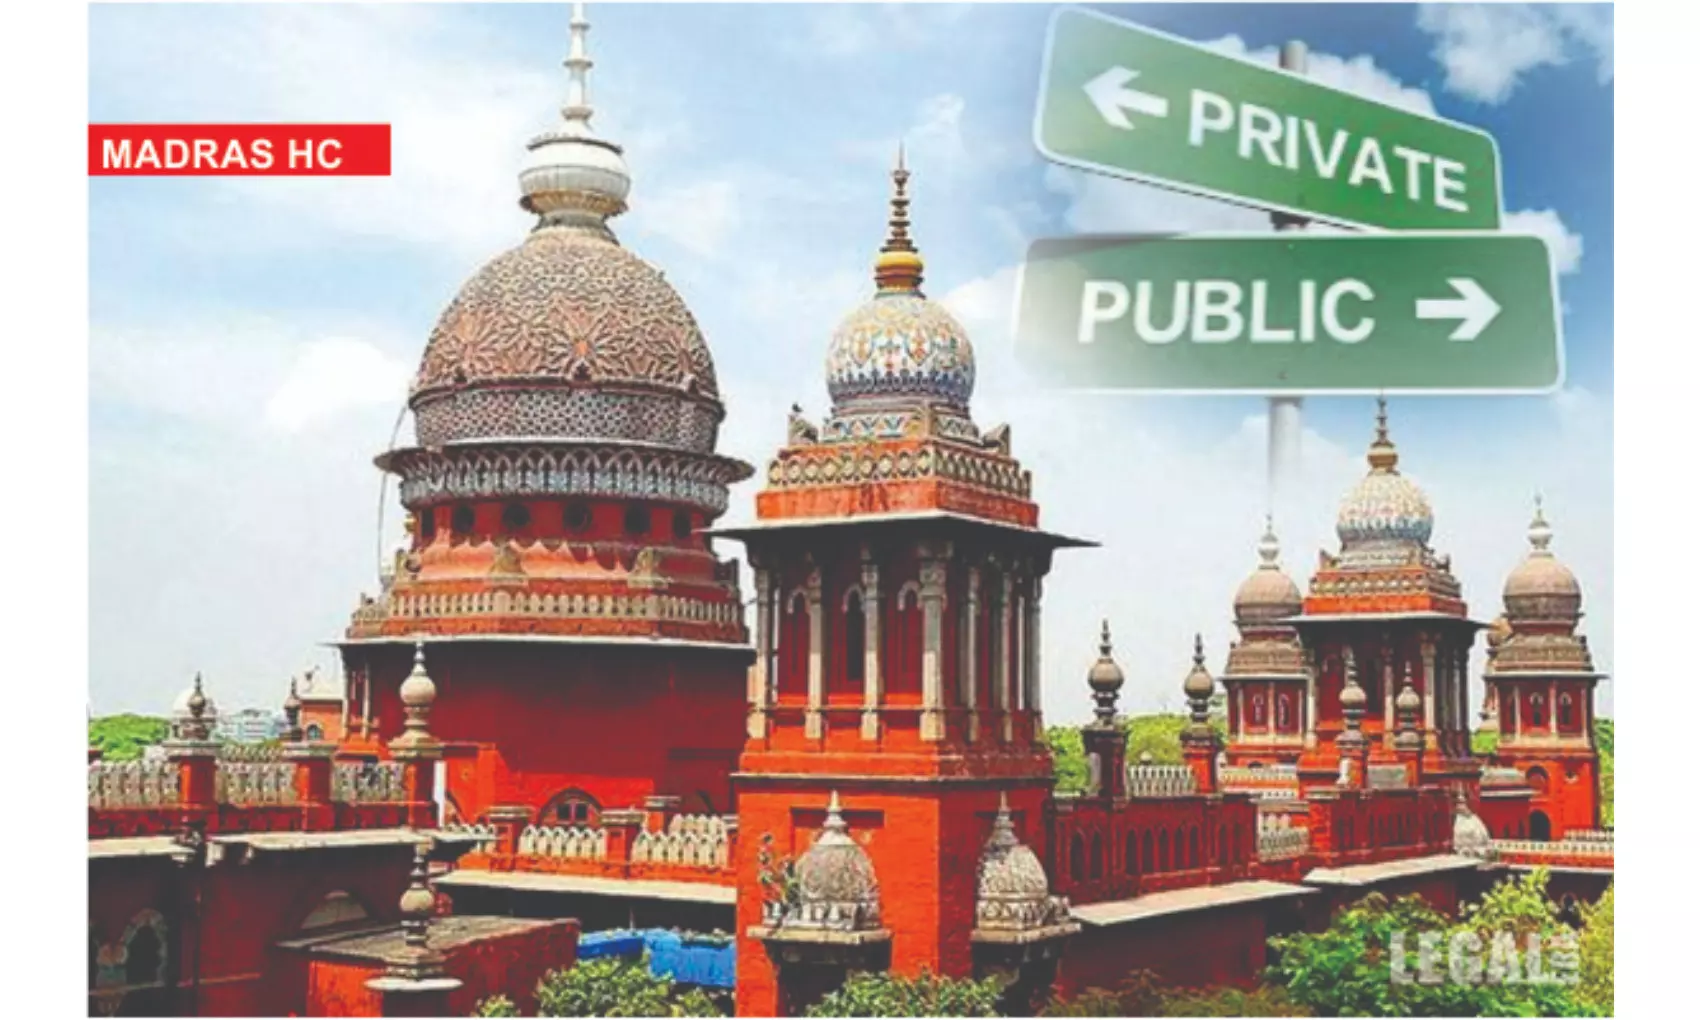 Madras HC In Maintainability Of The Writ Petition In A Contractual Matter